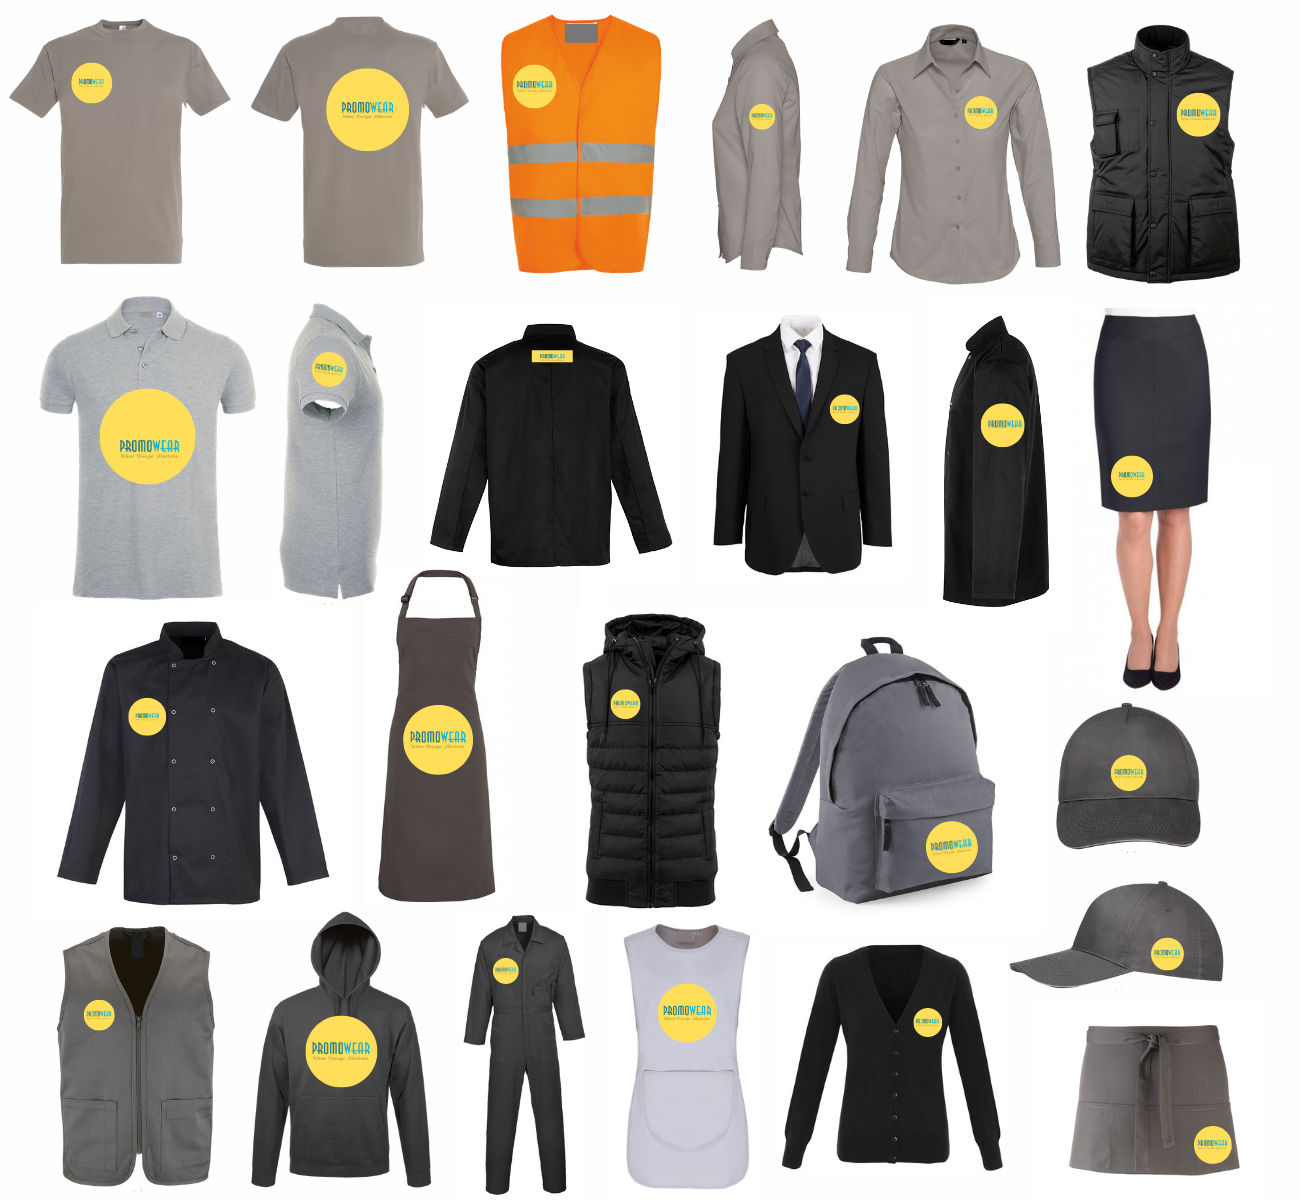 Image showing various Promowear customisation ideas for promotional wear.